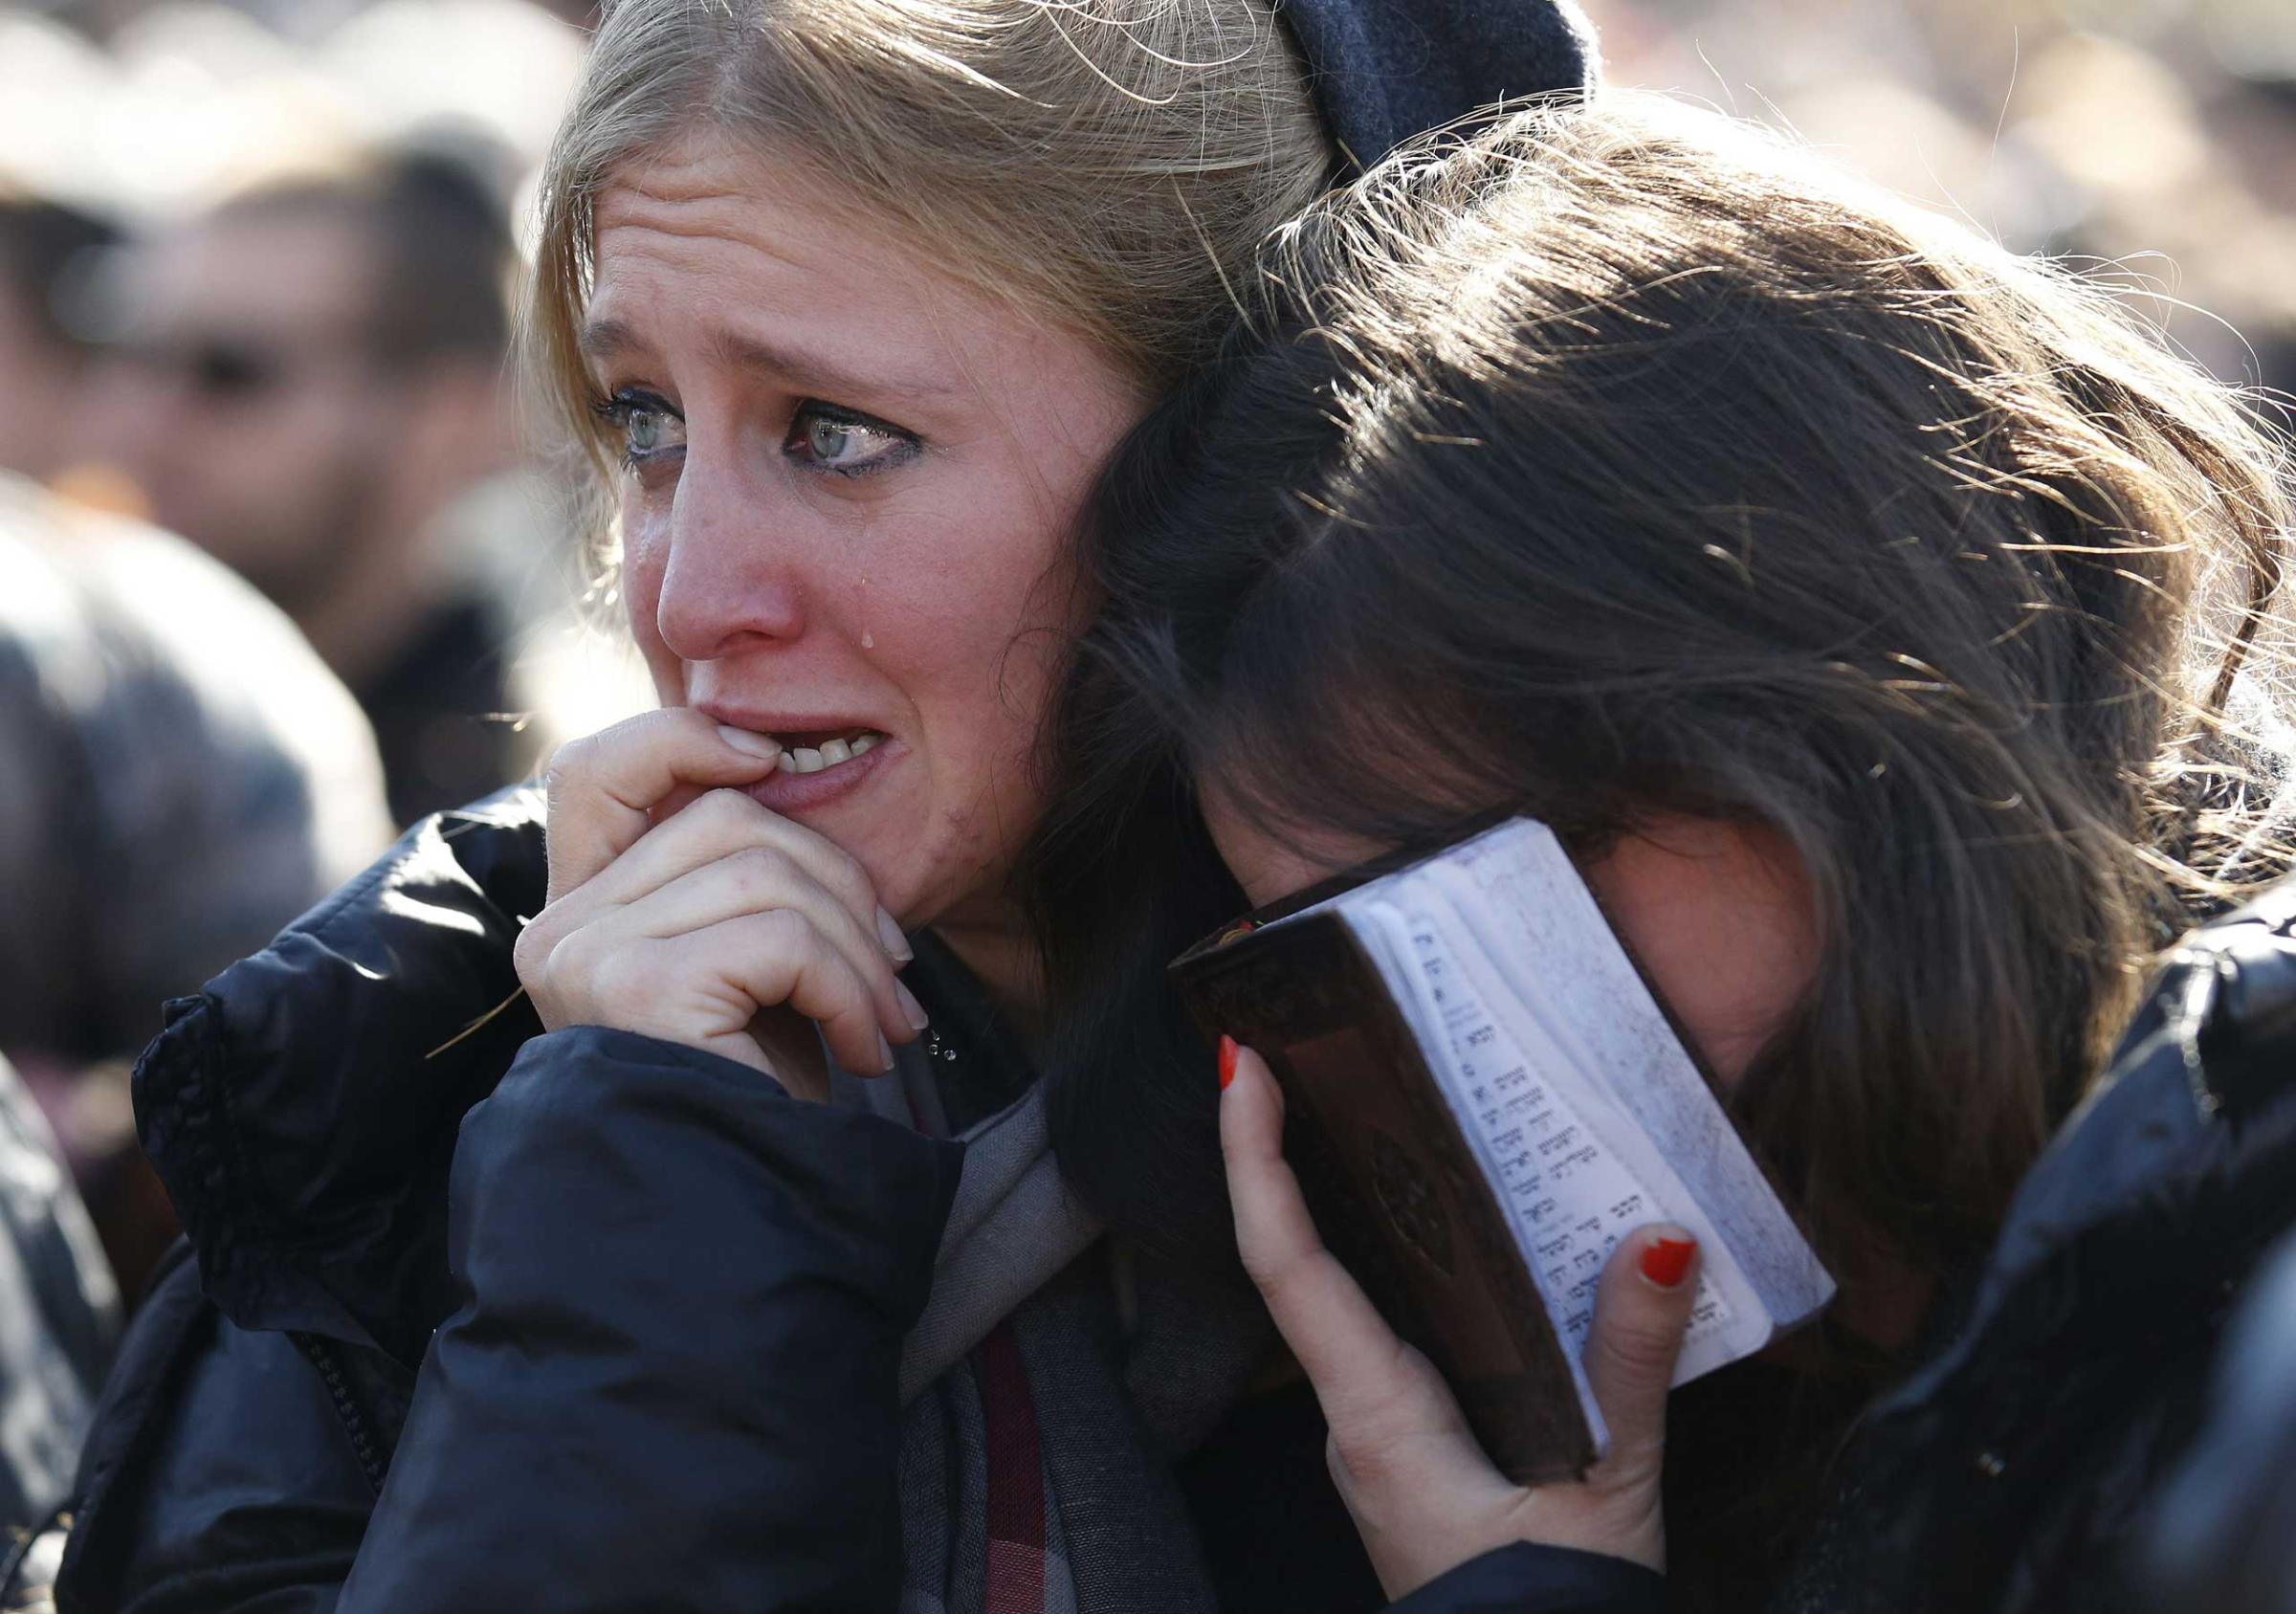 Mourners react in Jerusalem on Jan. 13, 2015 during the funeral of four Jews killed in an Islamist attack on a kosher supermarket in Paris last week.